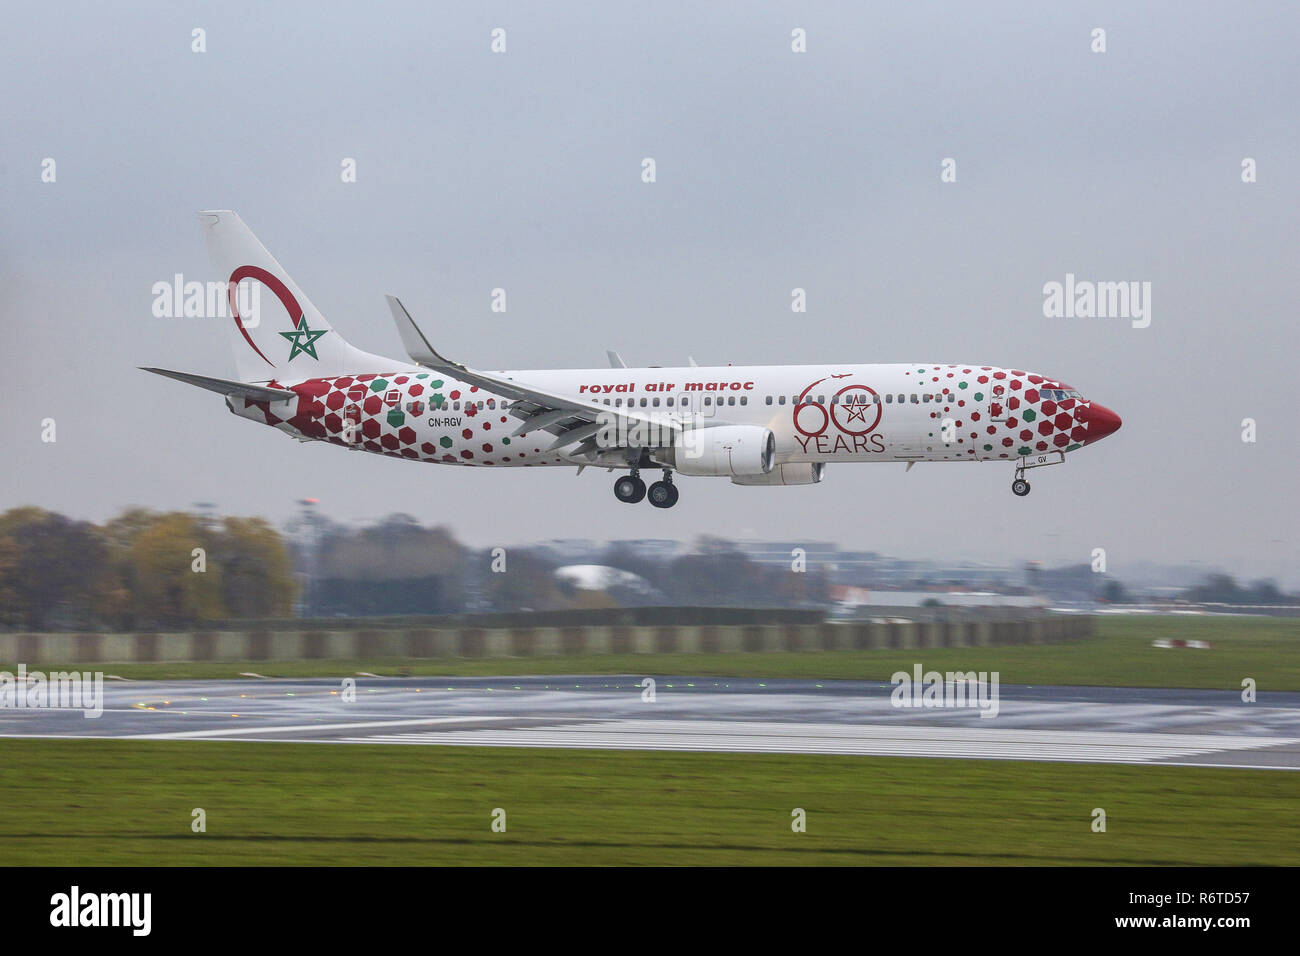 December 1, 2017 - Brussels, Belgium - The Royal Air Maroc or RAM Boeing 737-800 is seen landing at the Brussels International Airport in Belgium, known as Brussels National or Zavantem Airport with IATA / ICAO codes BRU and EBBR.. The aircraft is a Boeing 737-800 with registration CN-RGV and is painted in special scheme ''60 years'' livery. RAM connects Brussels to Casablanca, Nador, Rabat, Tangier and seasonal to Al Hoceima and Oujda. (Credit Image: © Nicolas Economou/SOPA Images via ZUMA Wire) Stock Photo